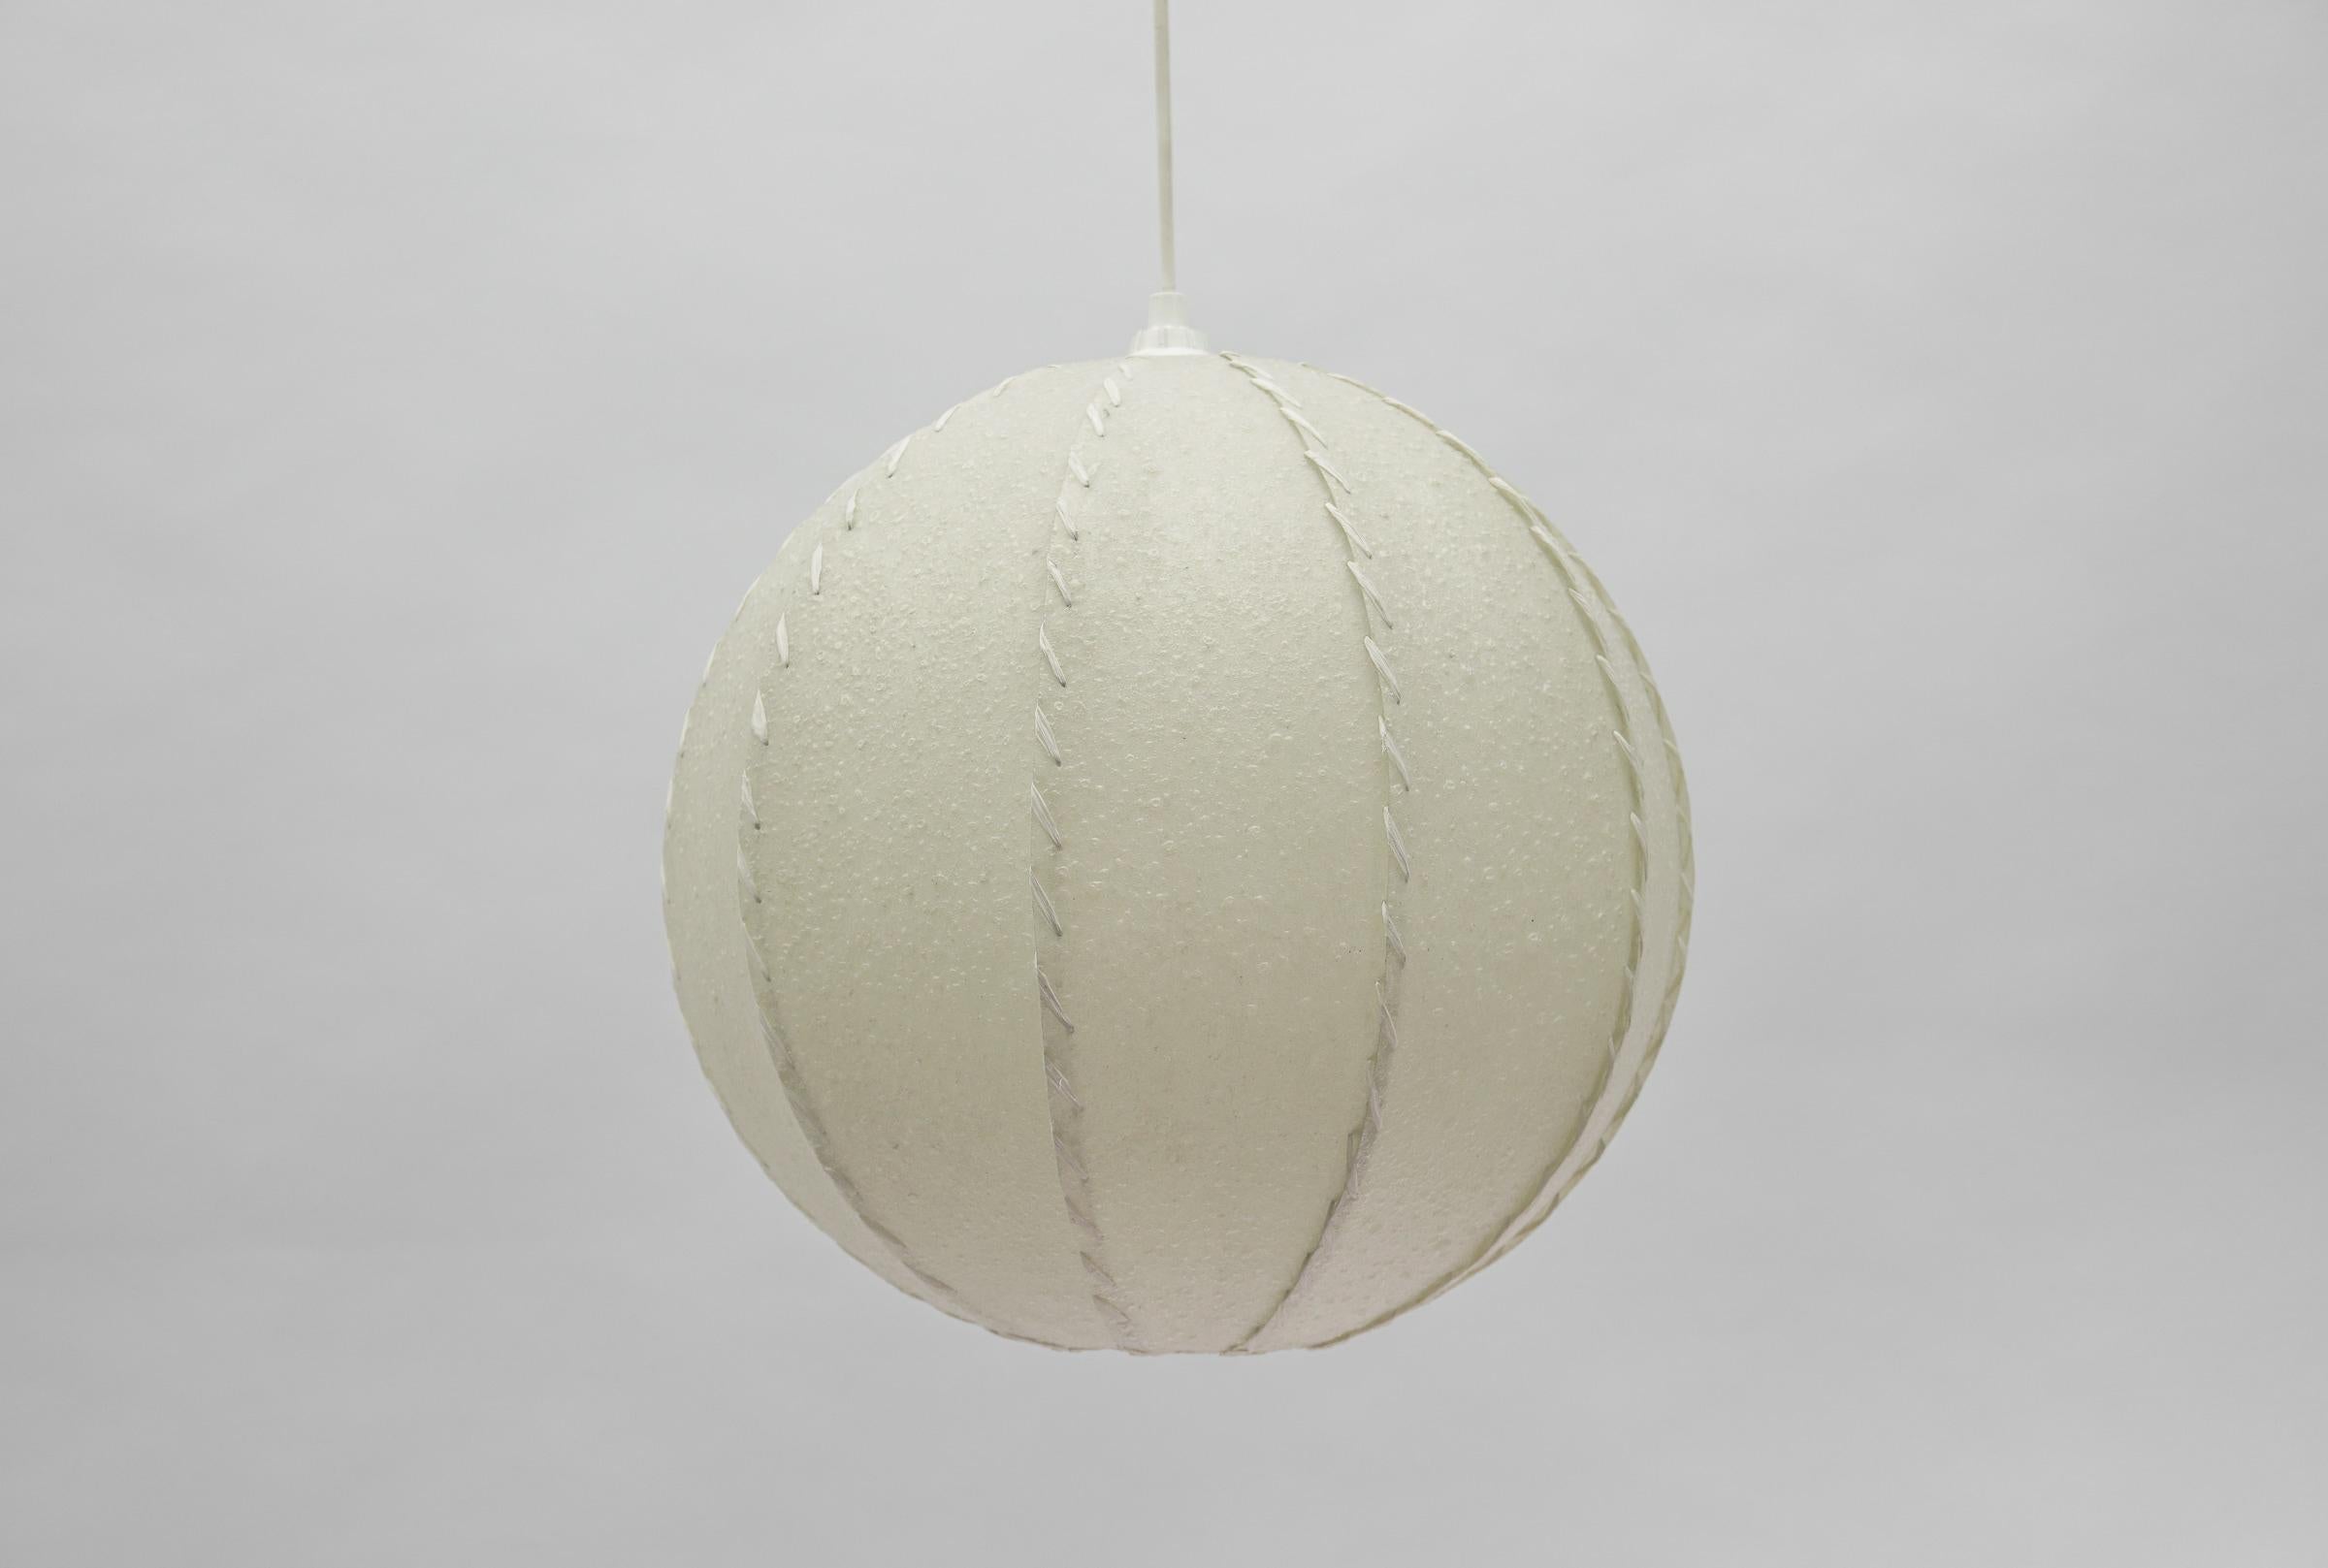 Metal Mid-Century Modern Skin Ball Lamp, 1960s, Italy For Sale